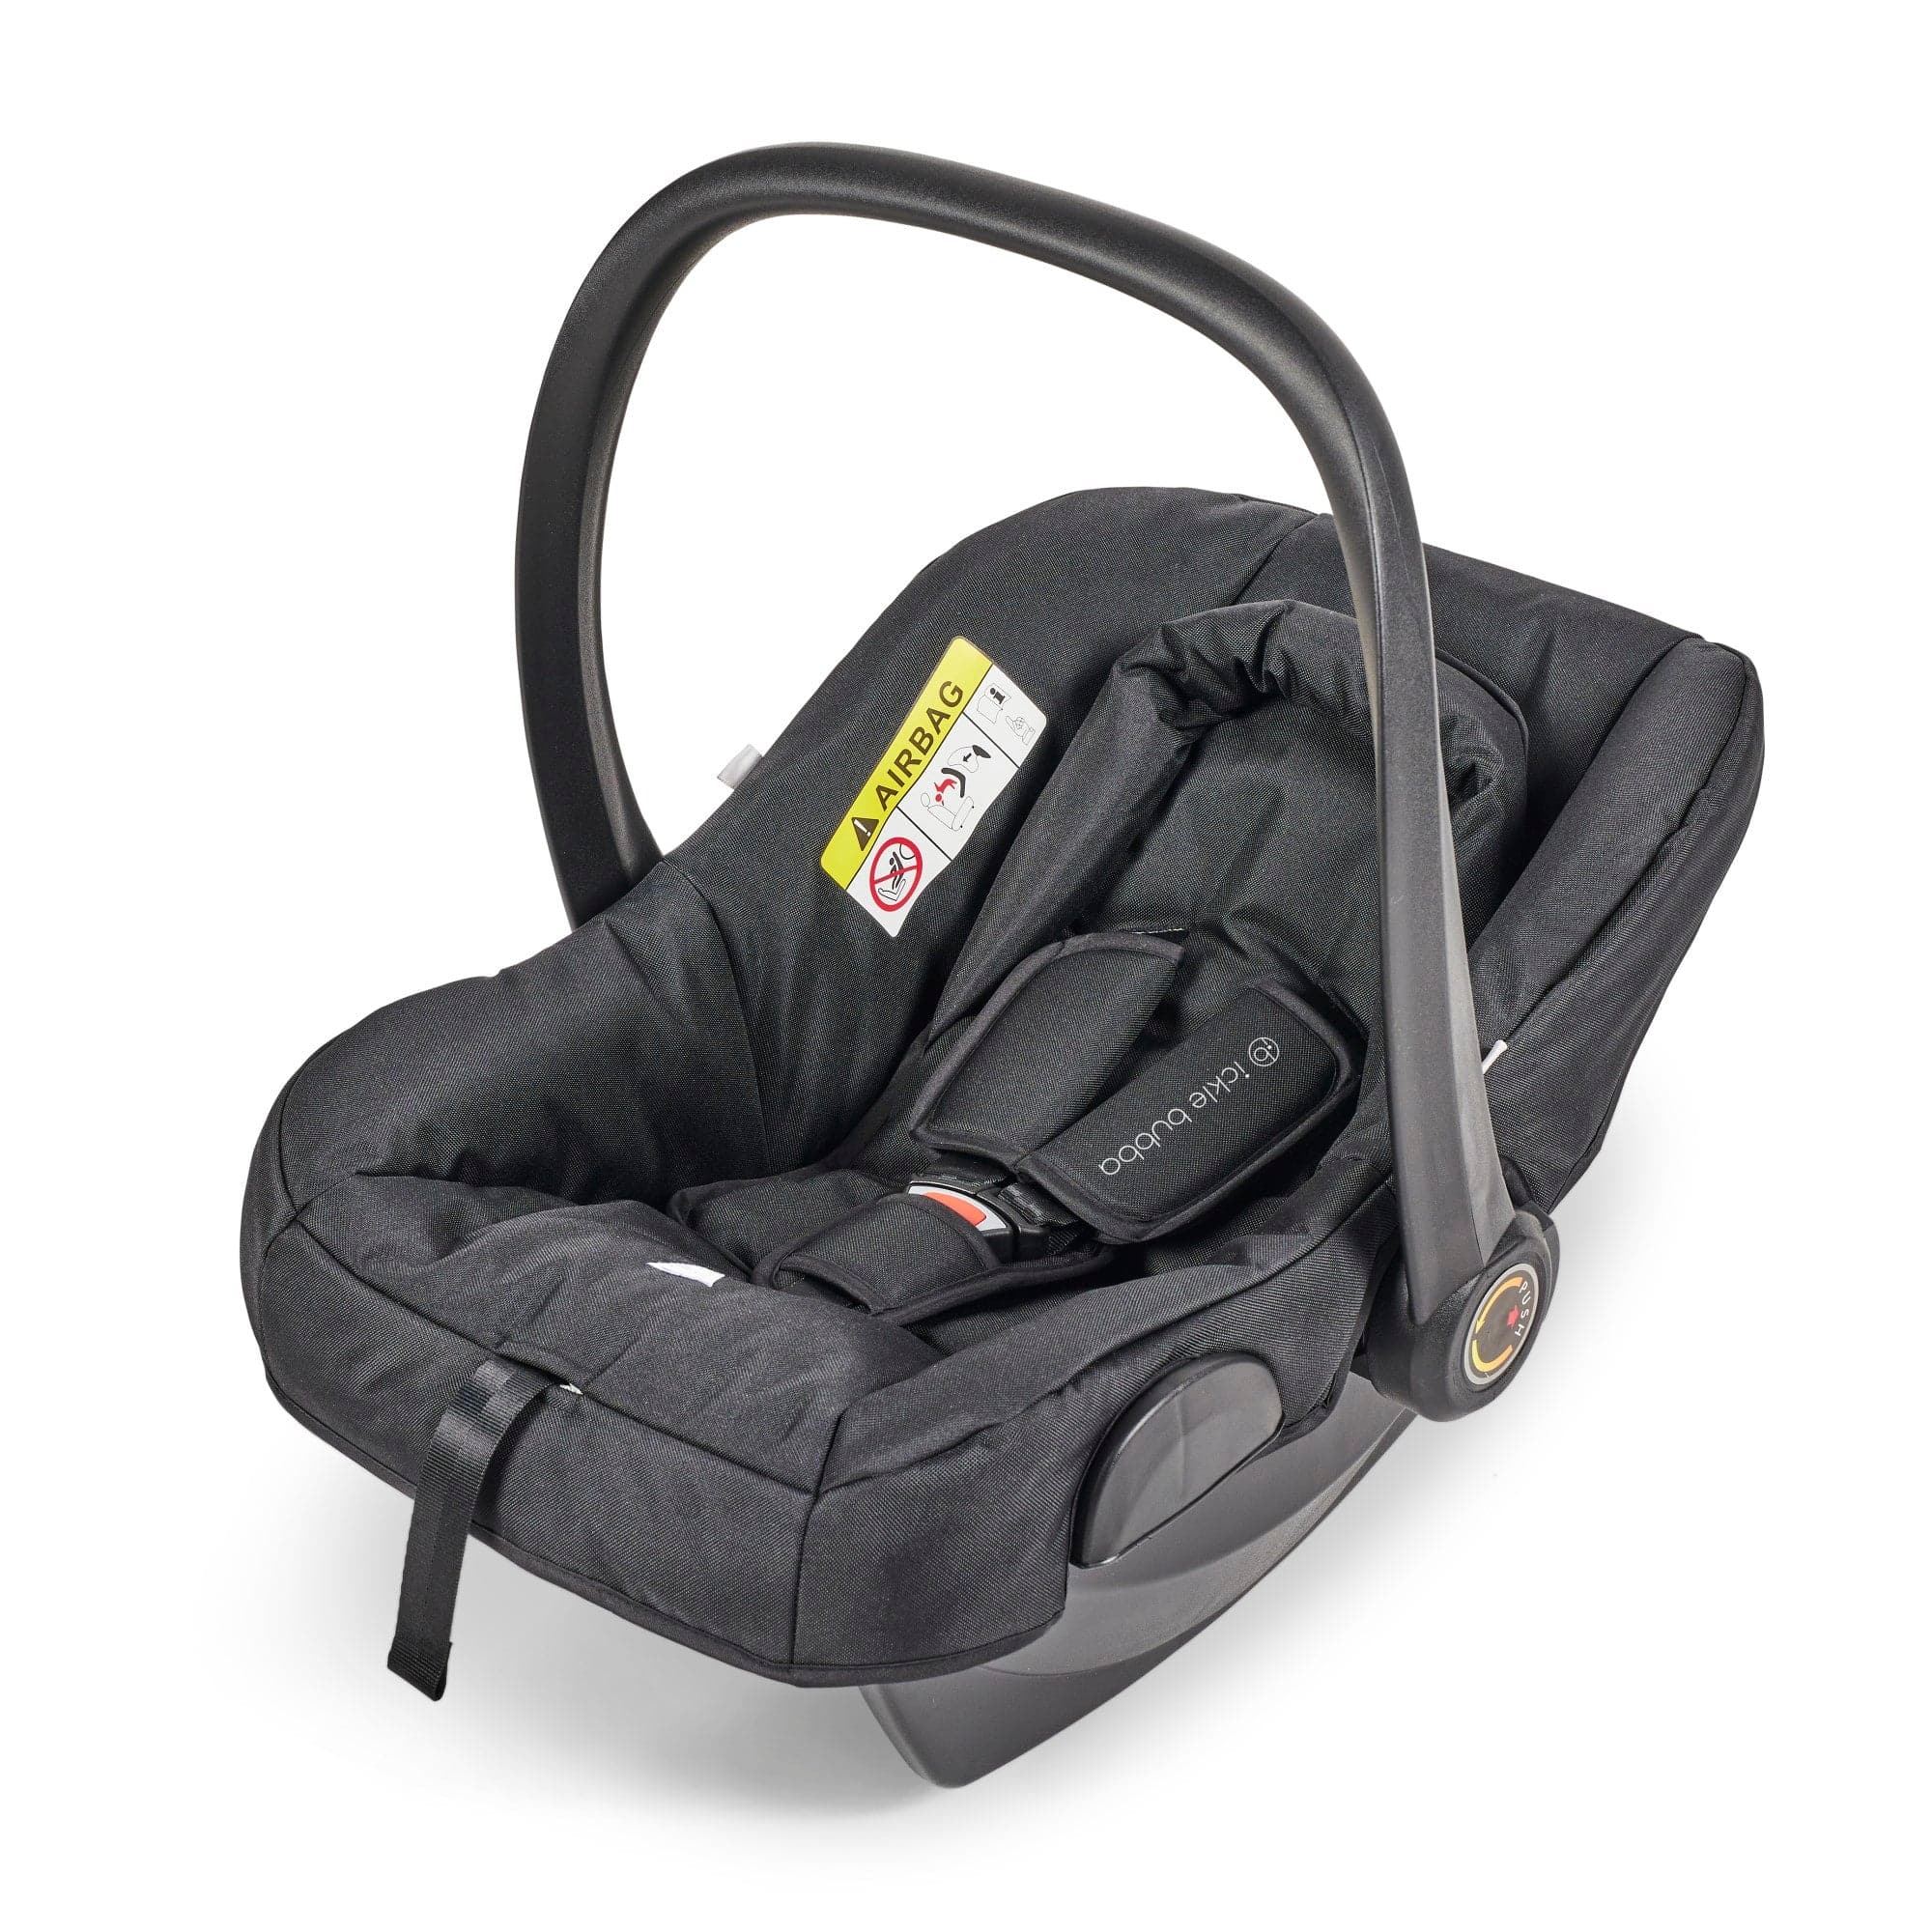 Ickle Bubba Comet 3-In-1 Travel System With Astral Car Seat - Dusky Pink -  | For Your Little One